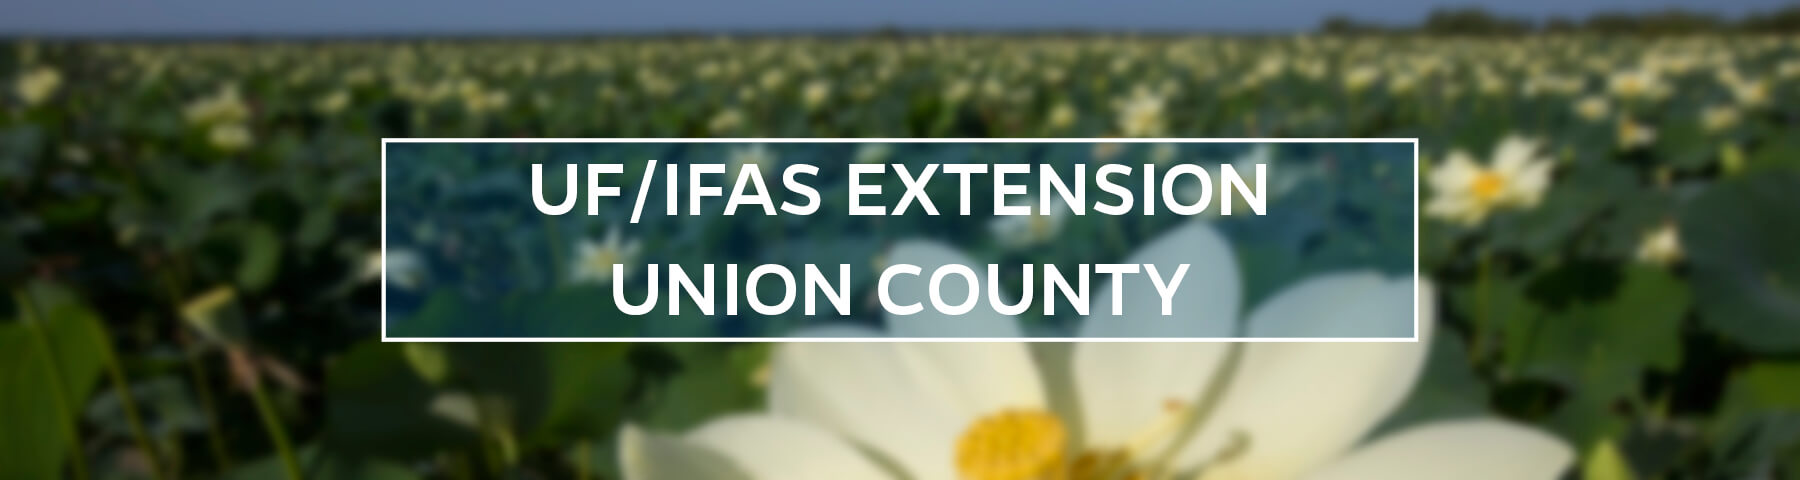 UF/IFAS Extension Union County